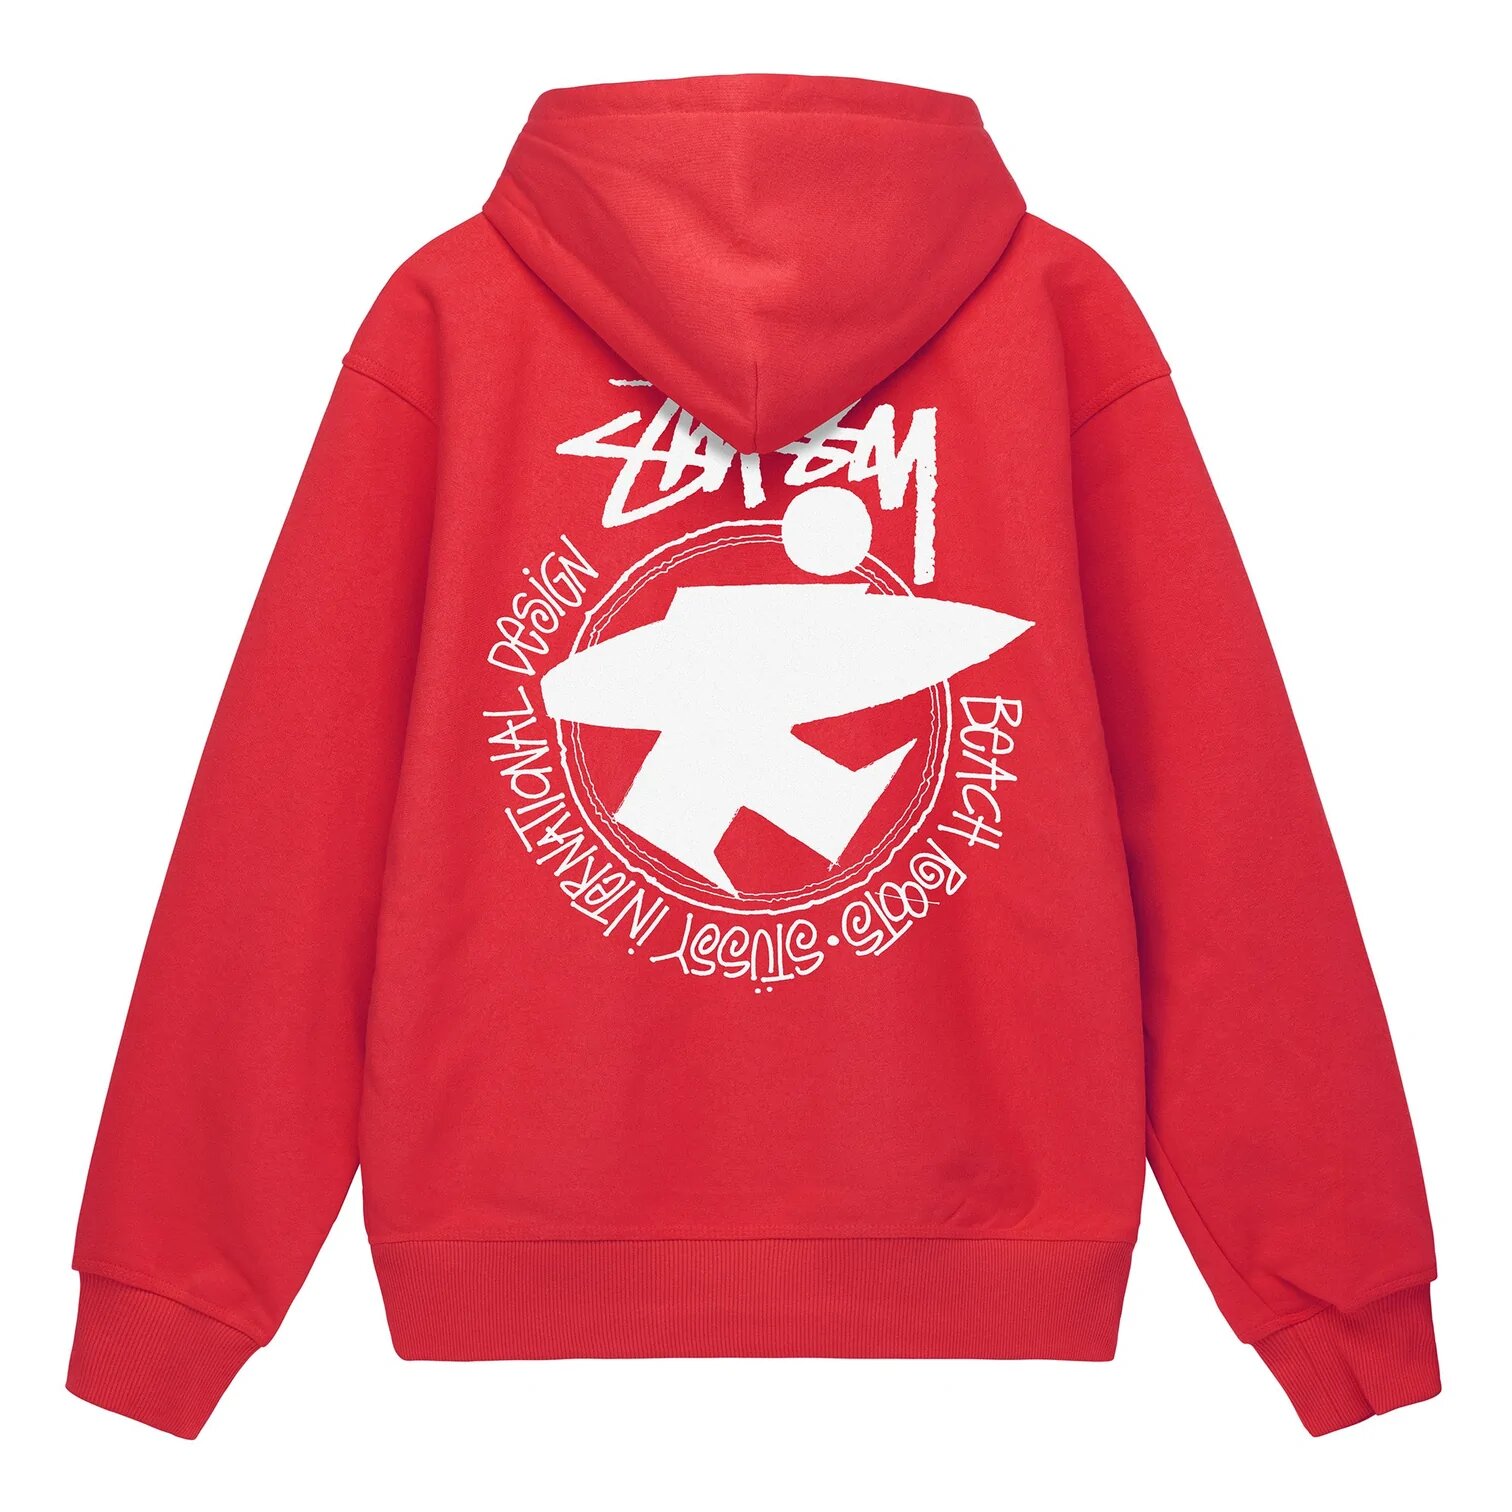 How the Stussy Hoodie can add romance to your Valentine's Day